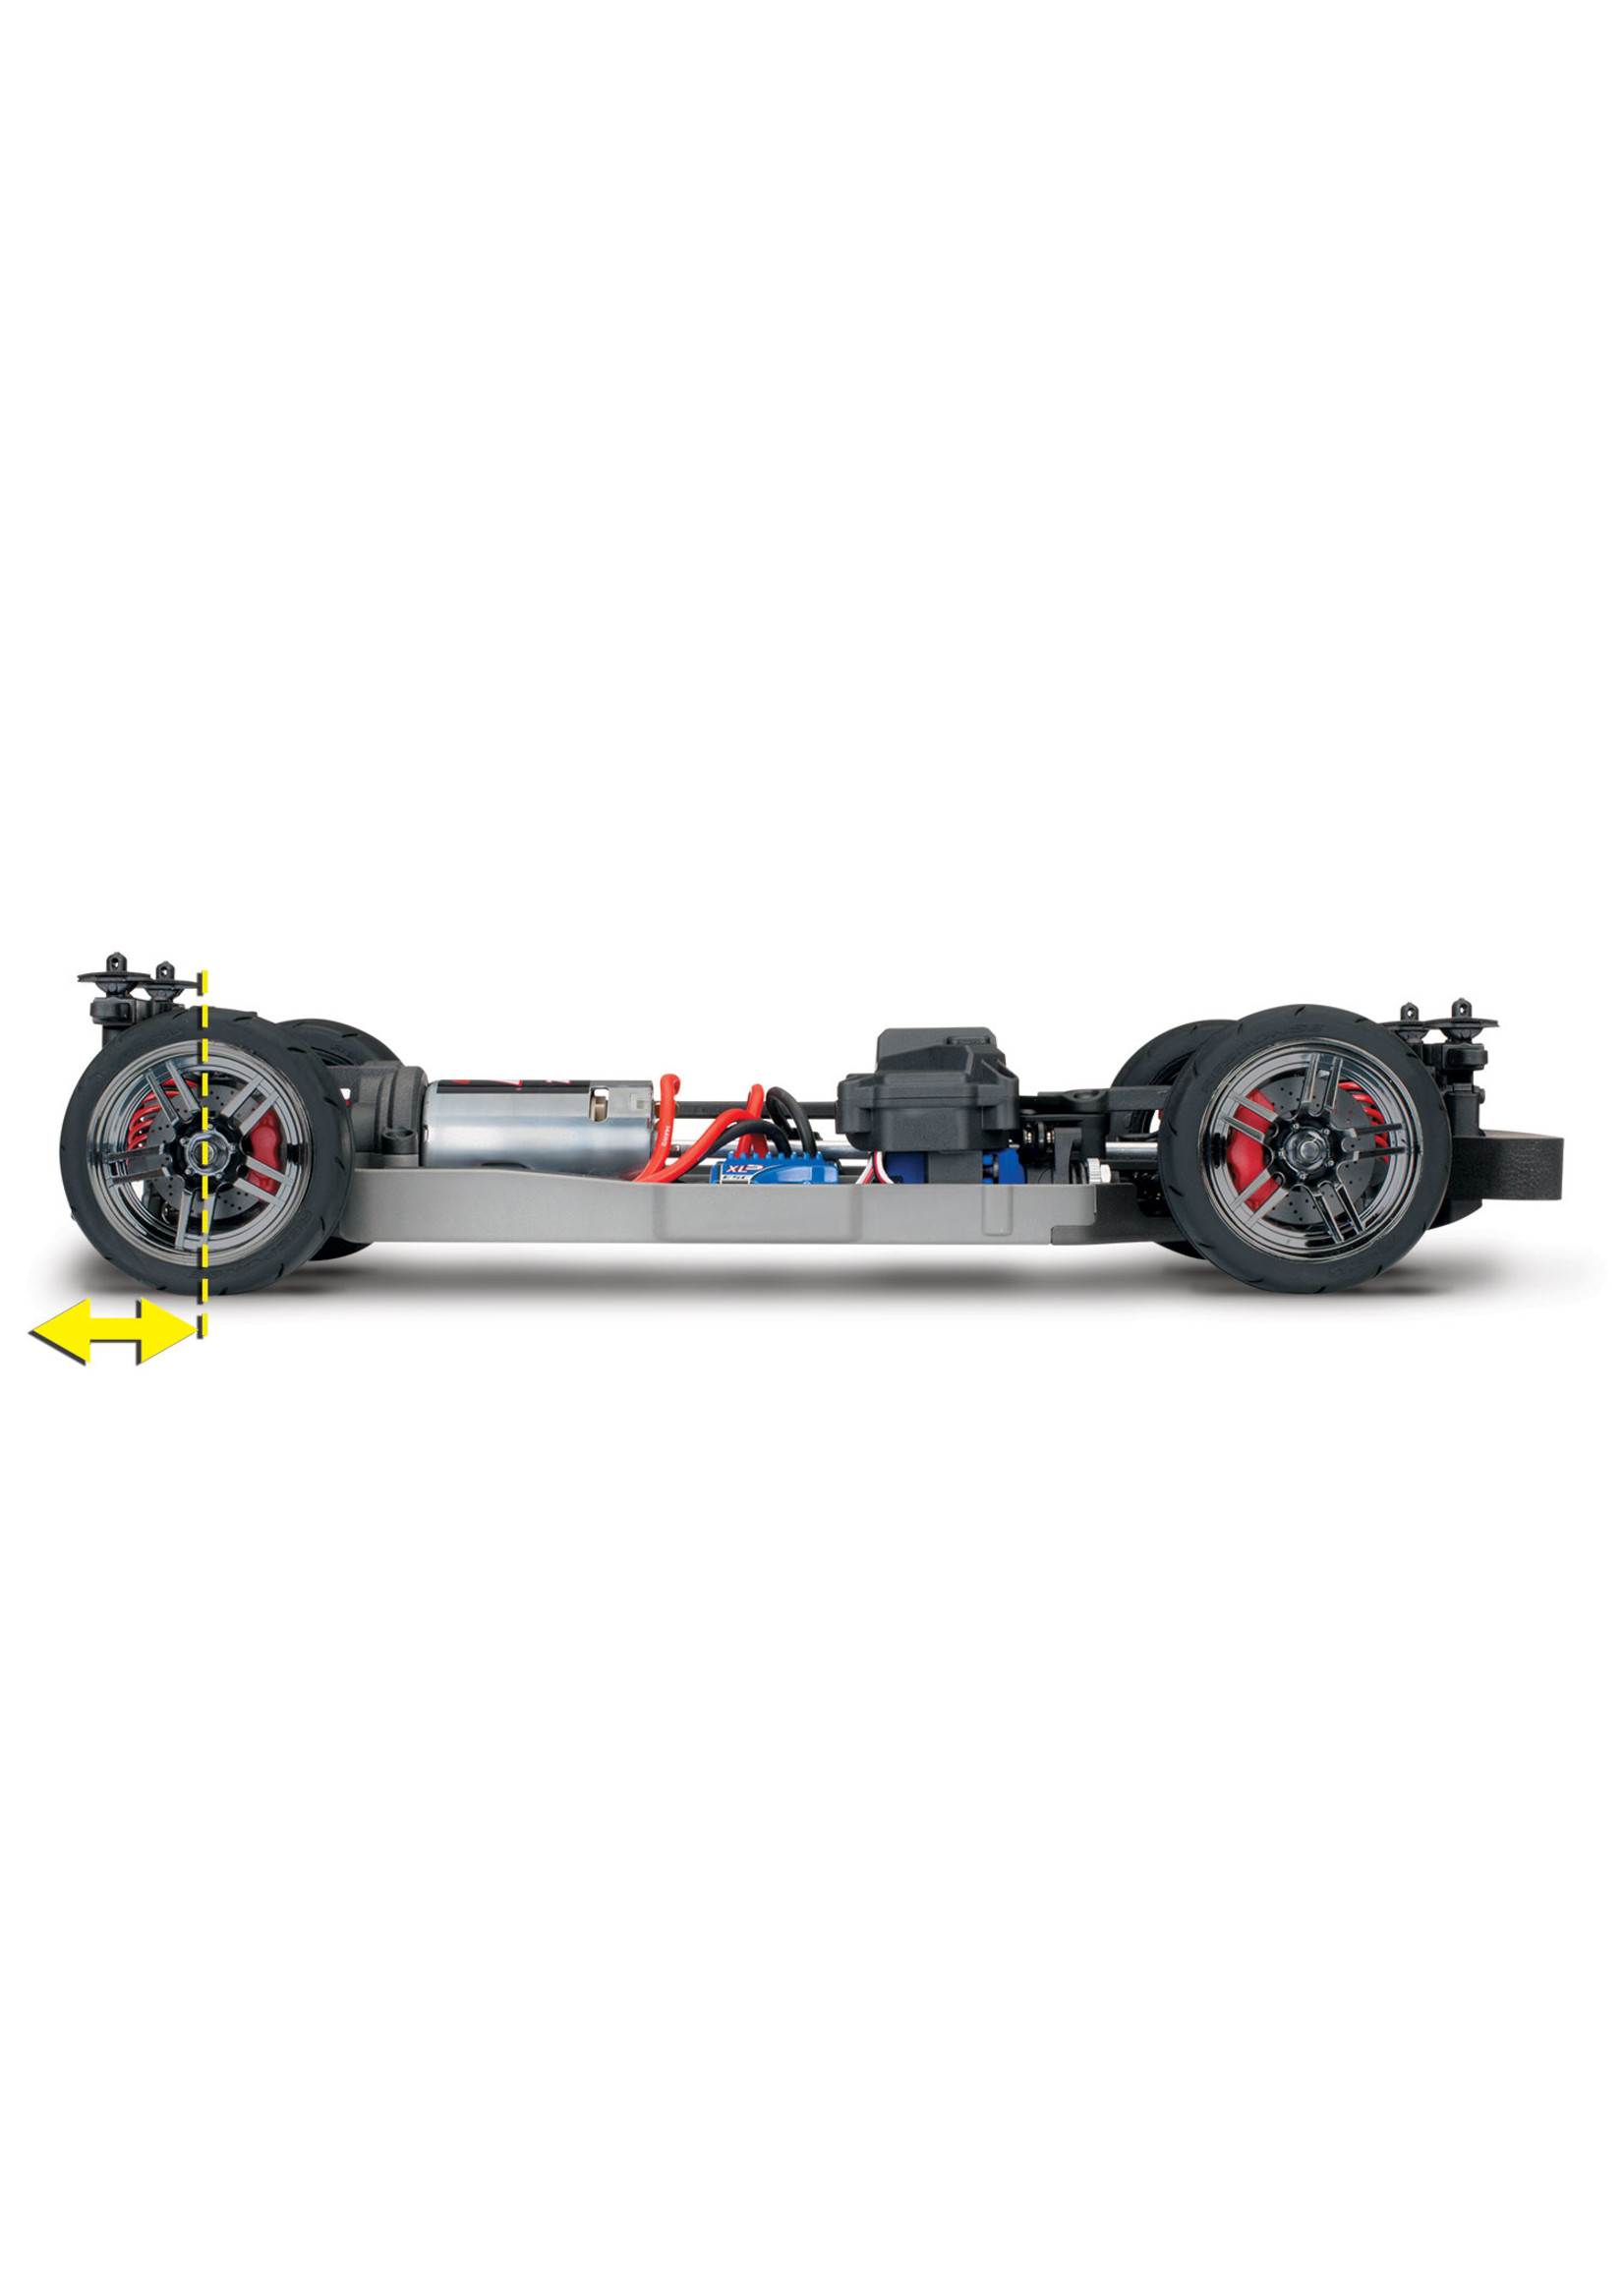 Traxxas 1/10 R5 4-Tec 2.0 AWD Chassis with Brushed Power System